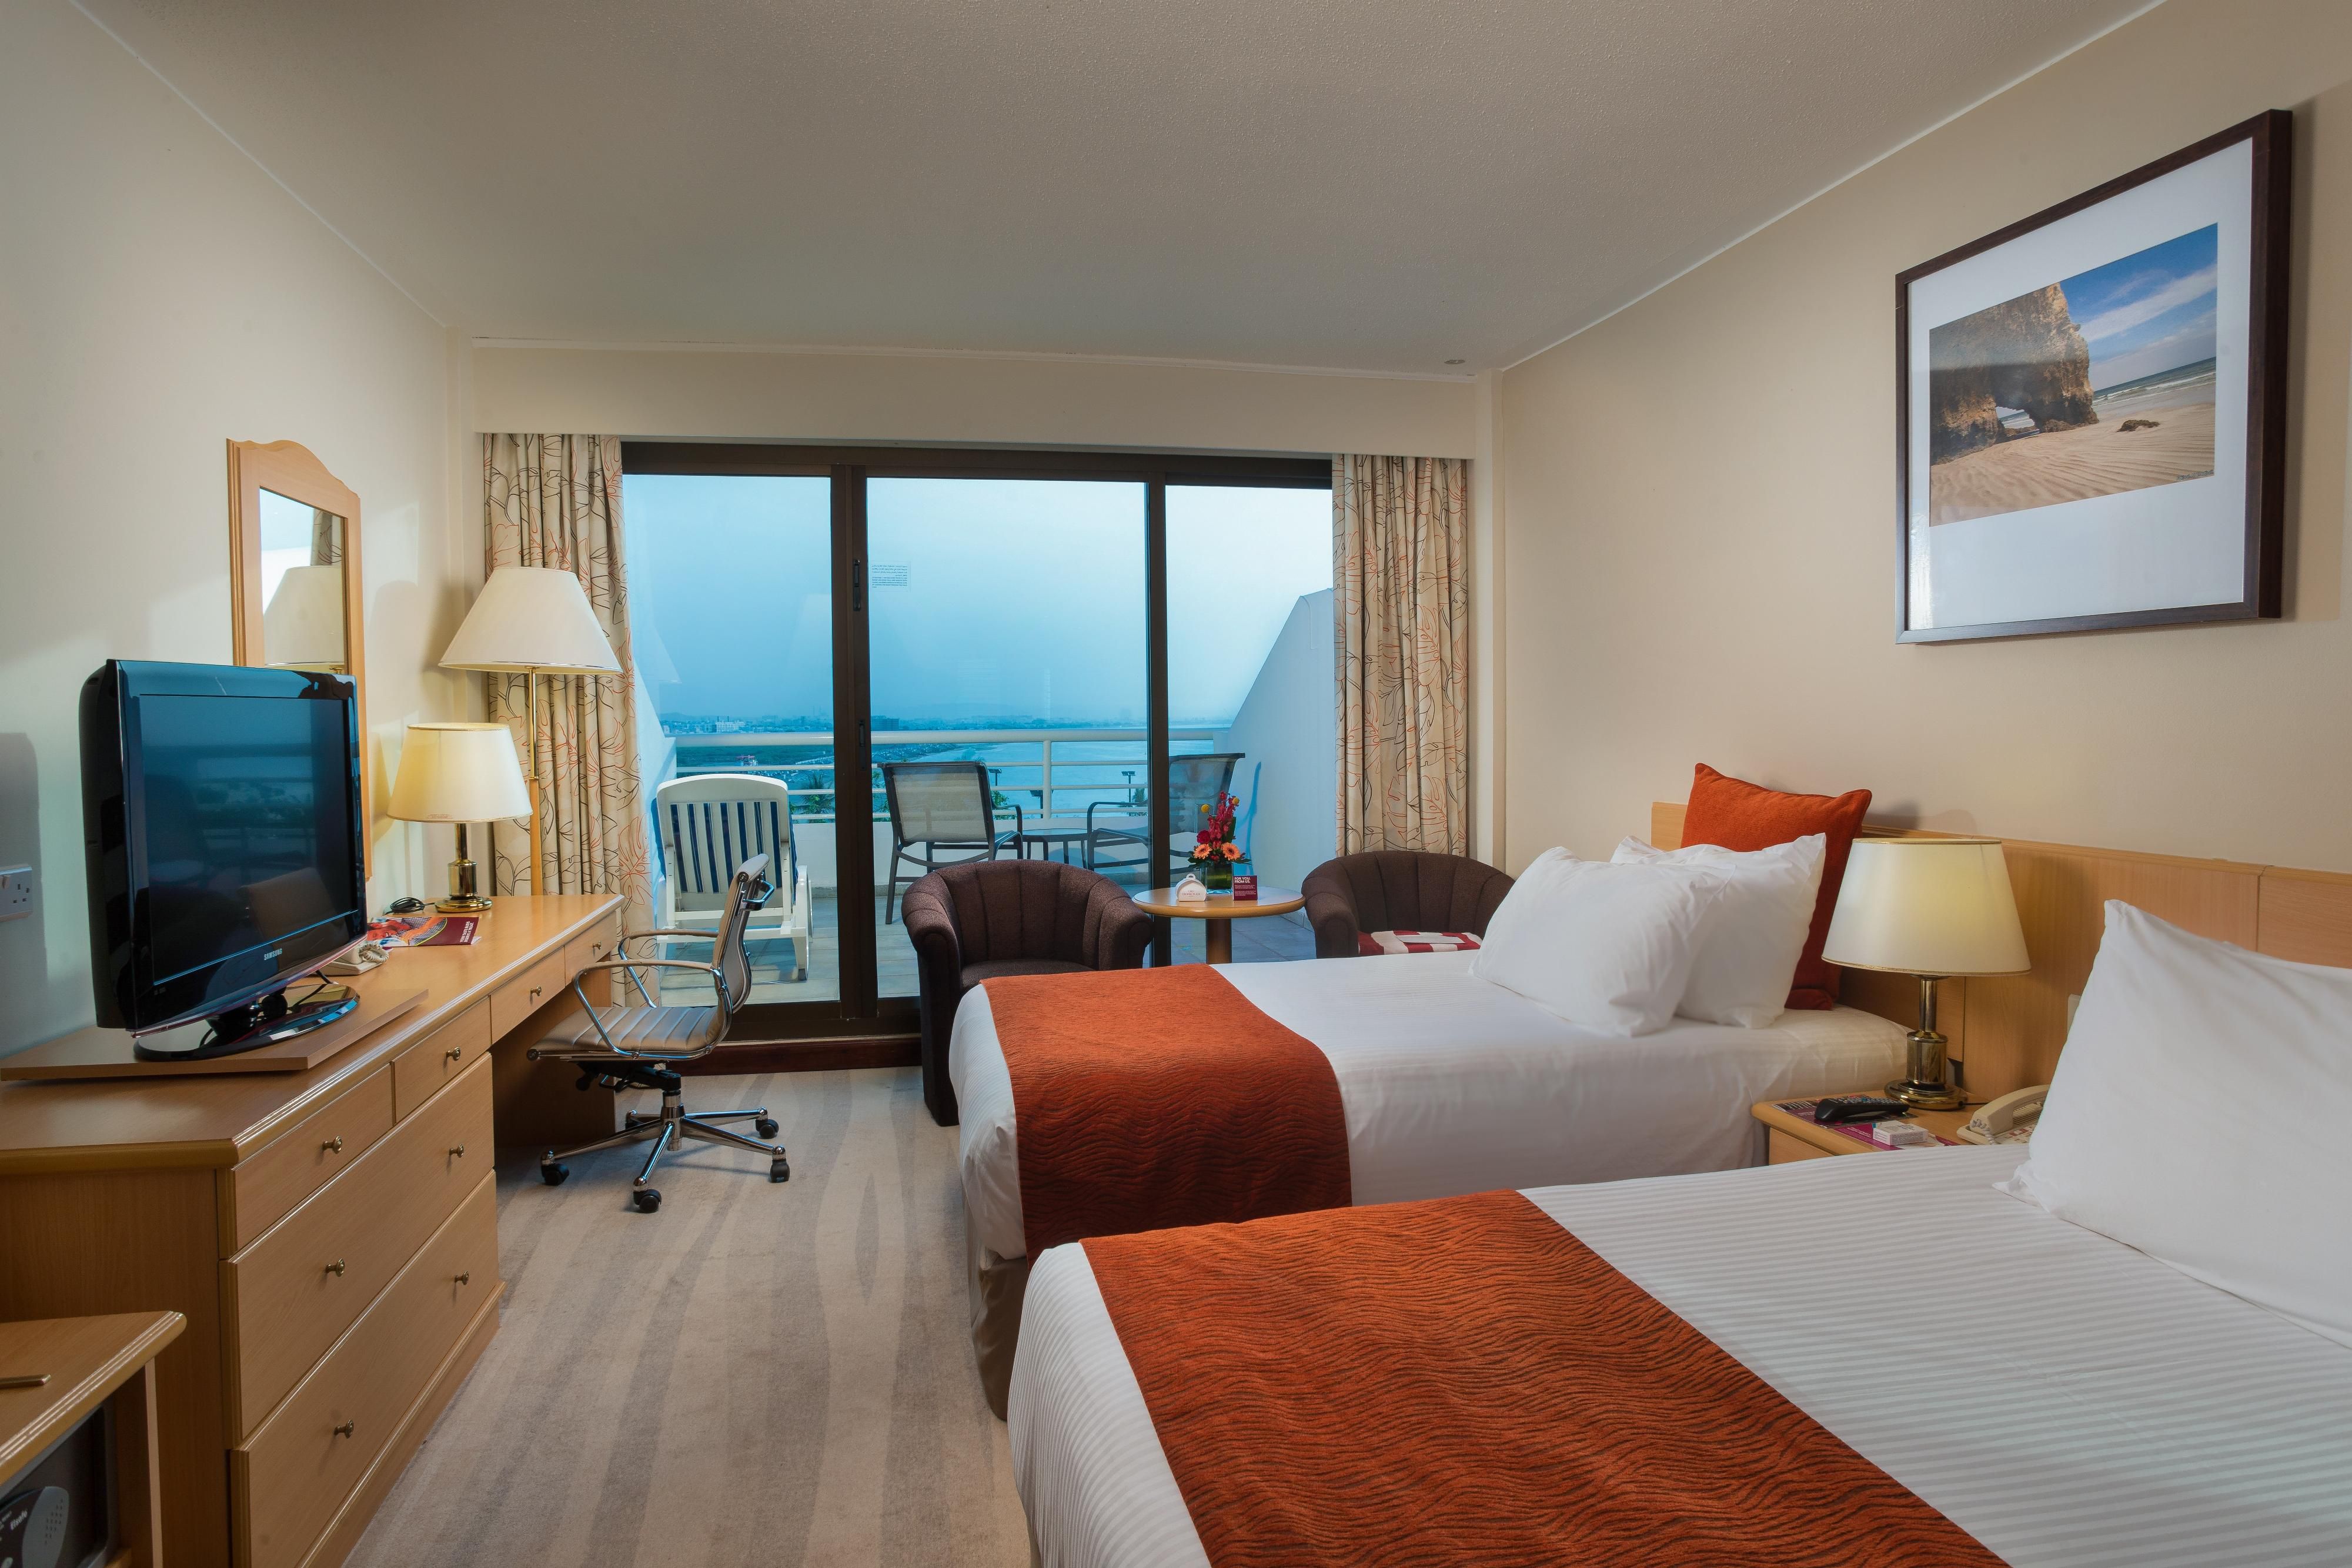 Twin Bed Sea View with Balcony overlokking Gulf of Oman